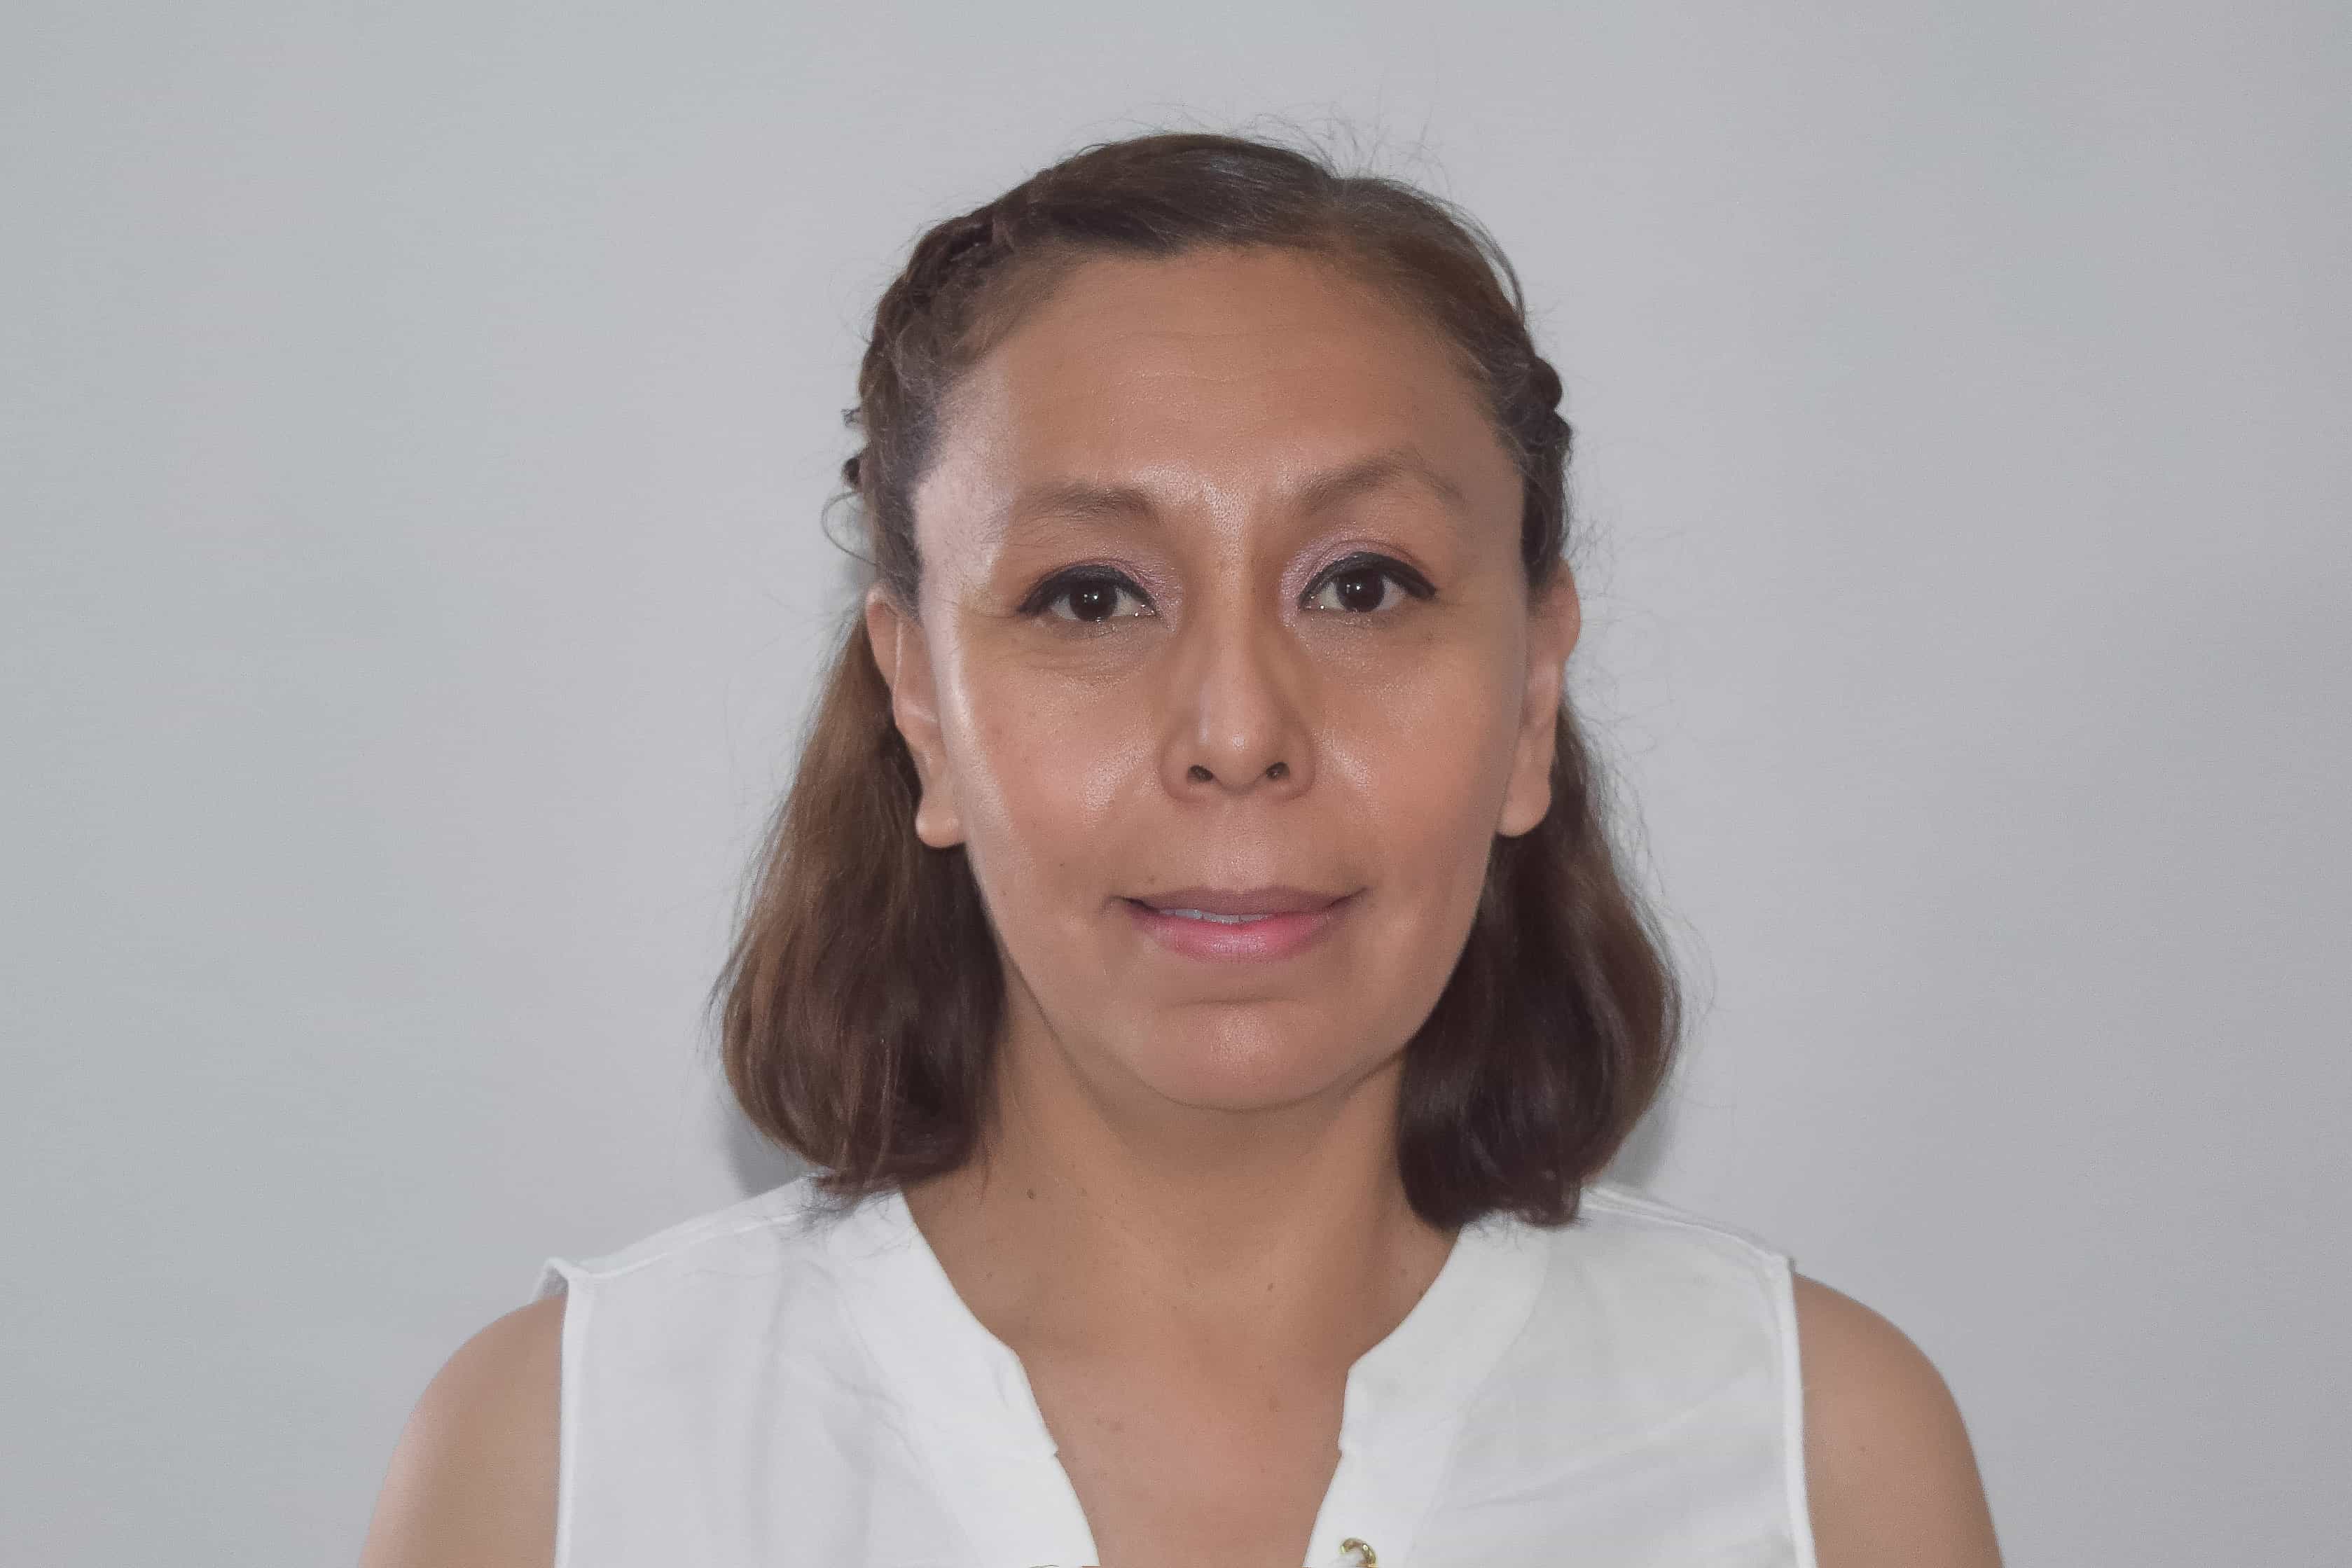 C. Norma Patricia Chalup Ayala